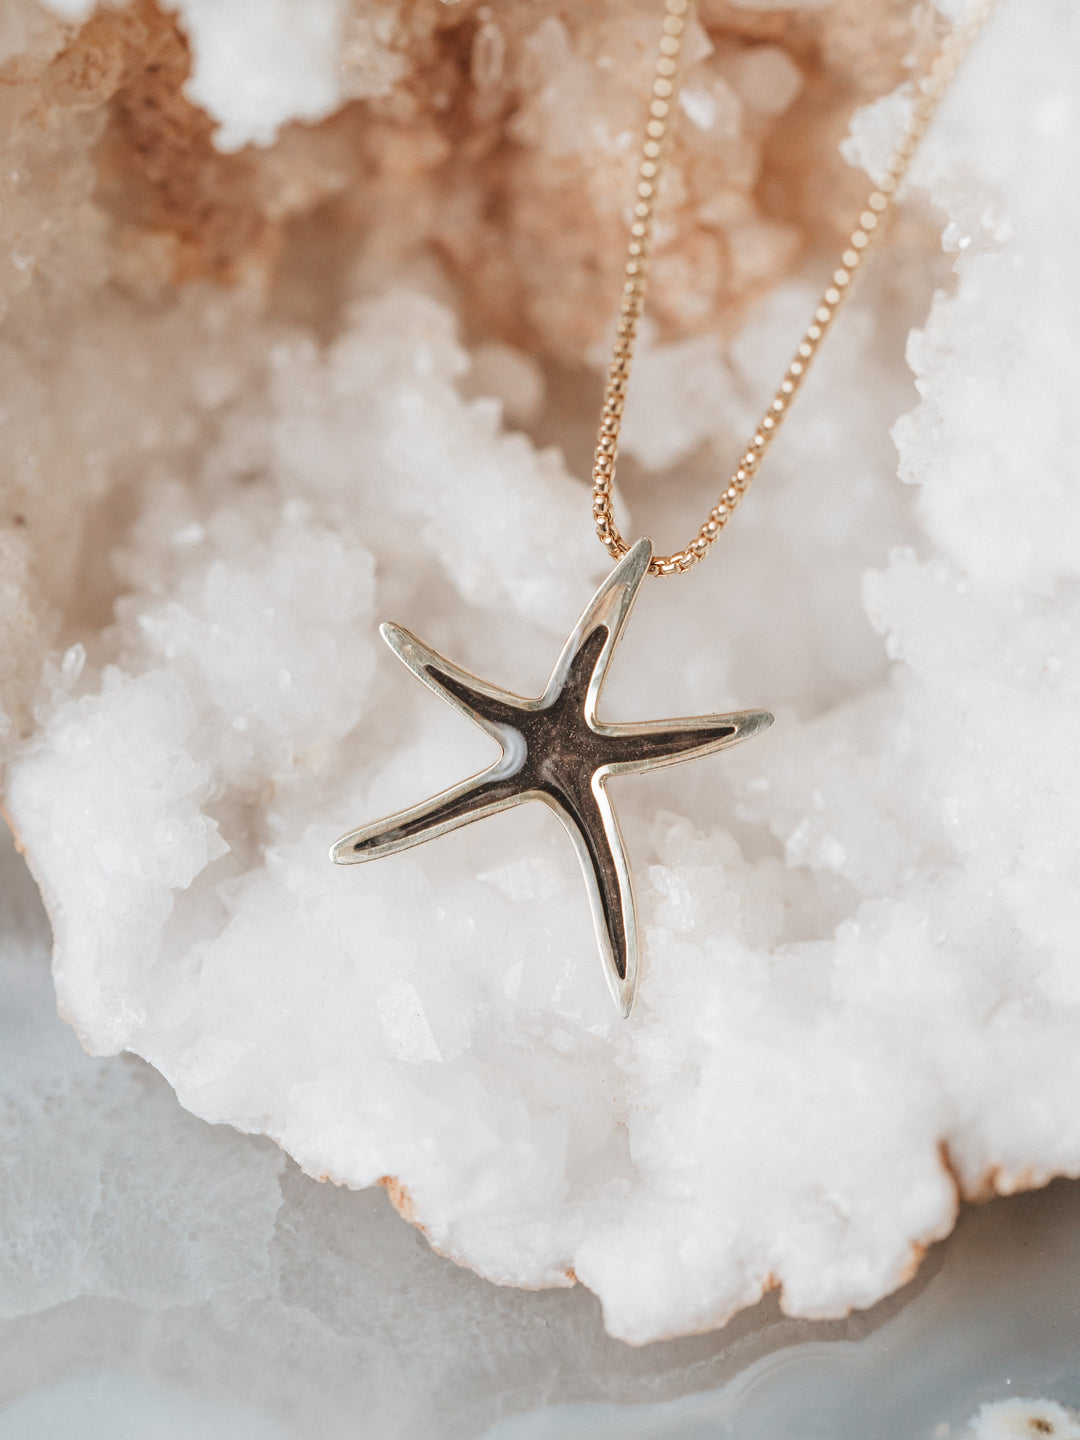 Close-up of Close By Me's Sea Star Cremation Necklace resting on a white and orange-colored crystal cluster.